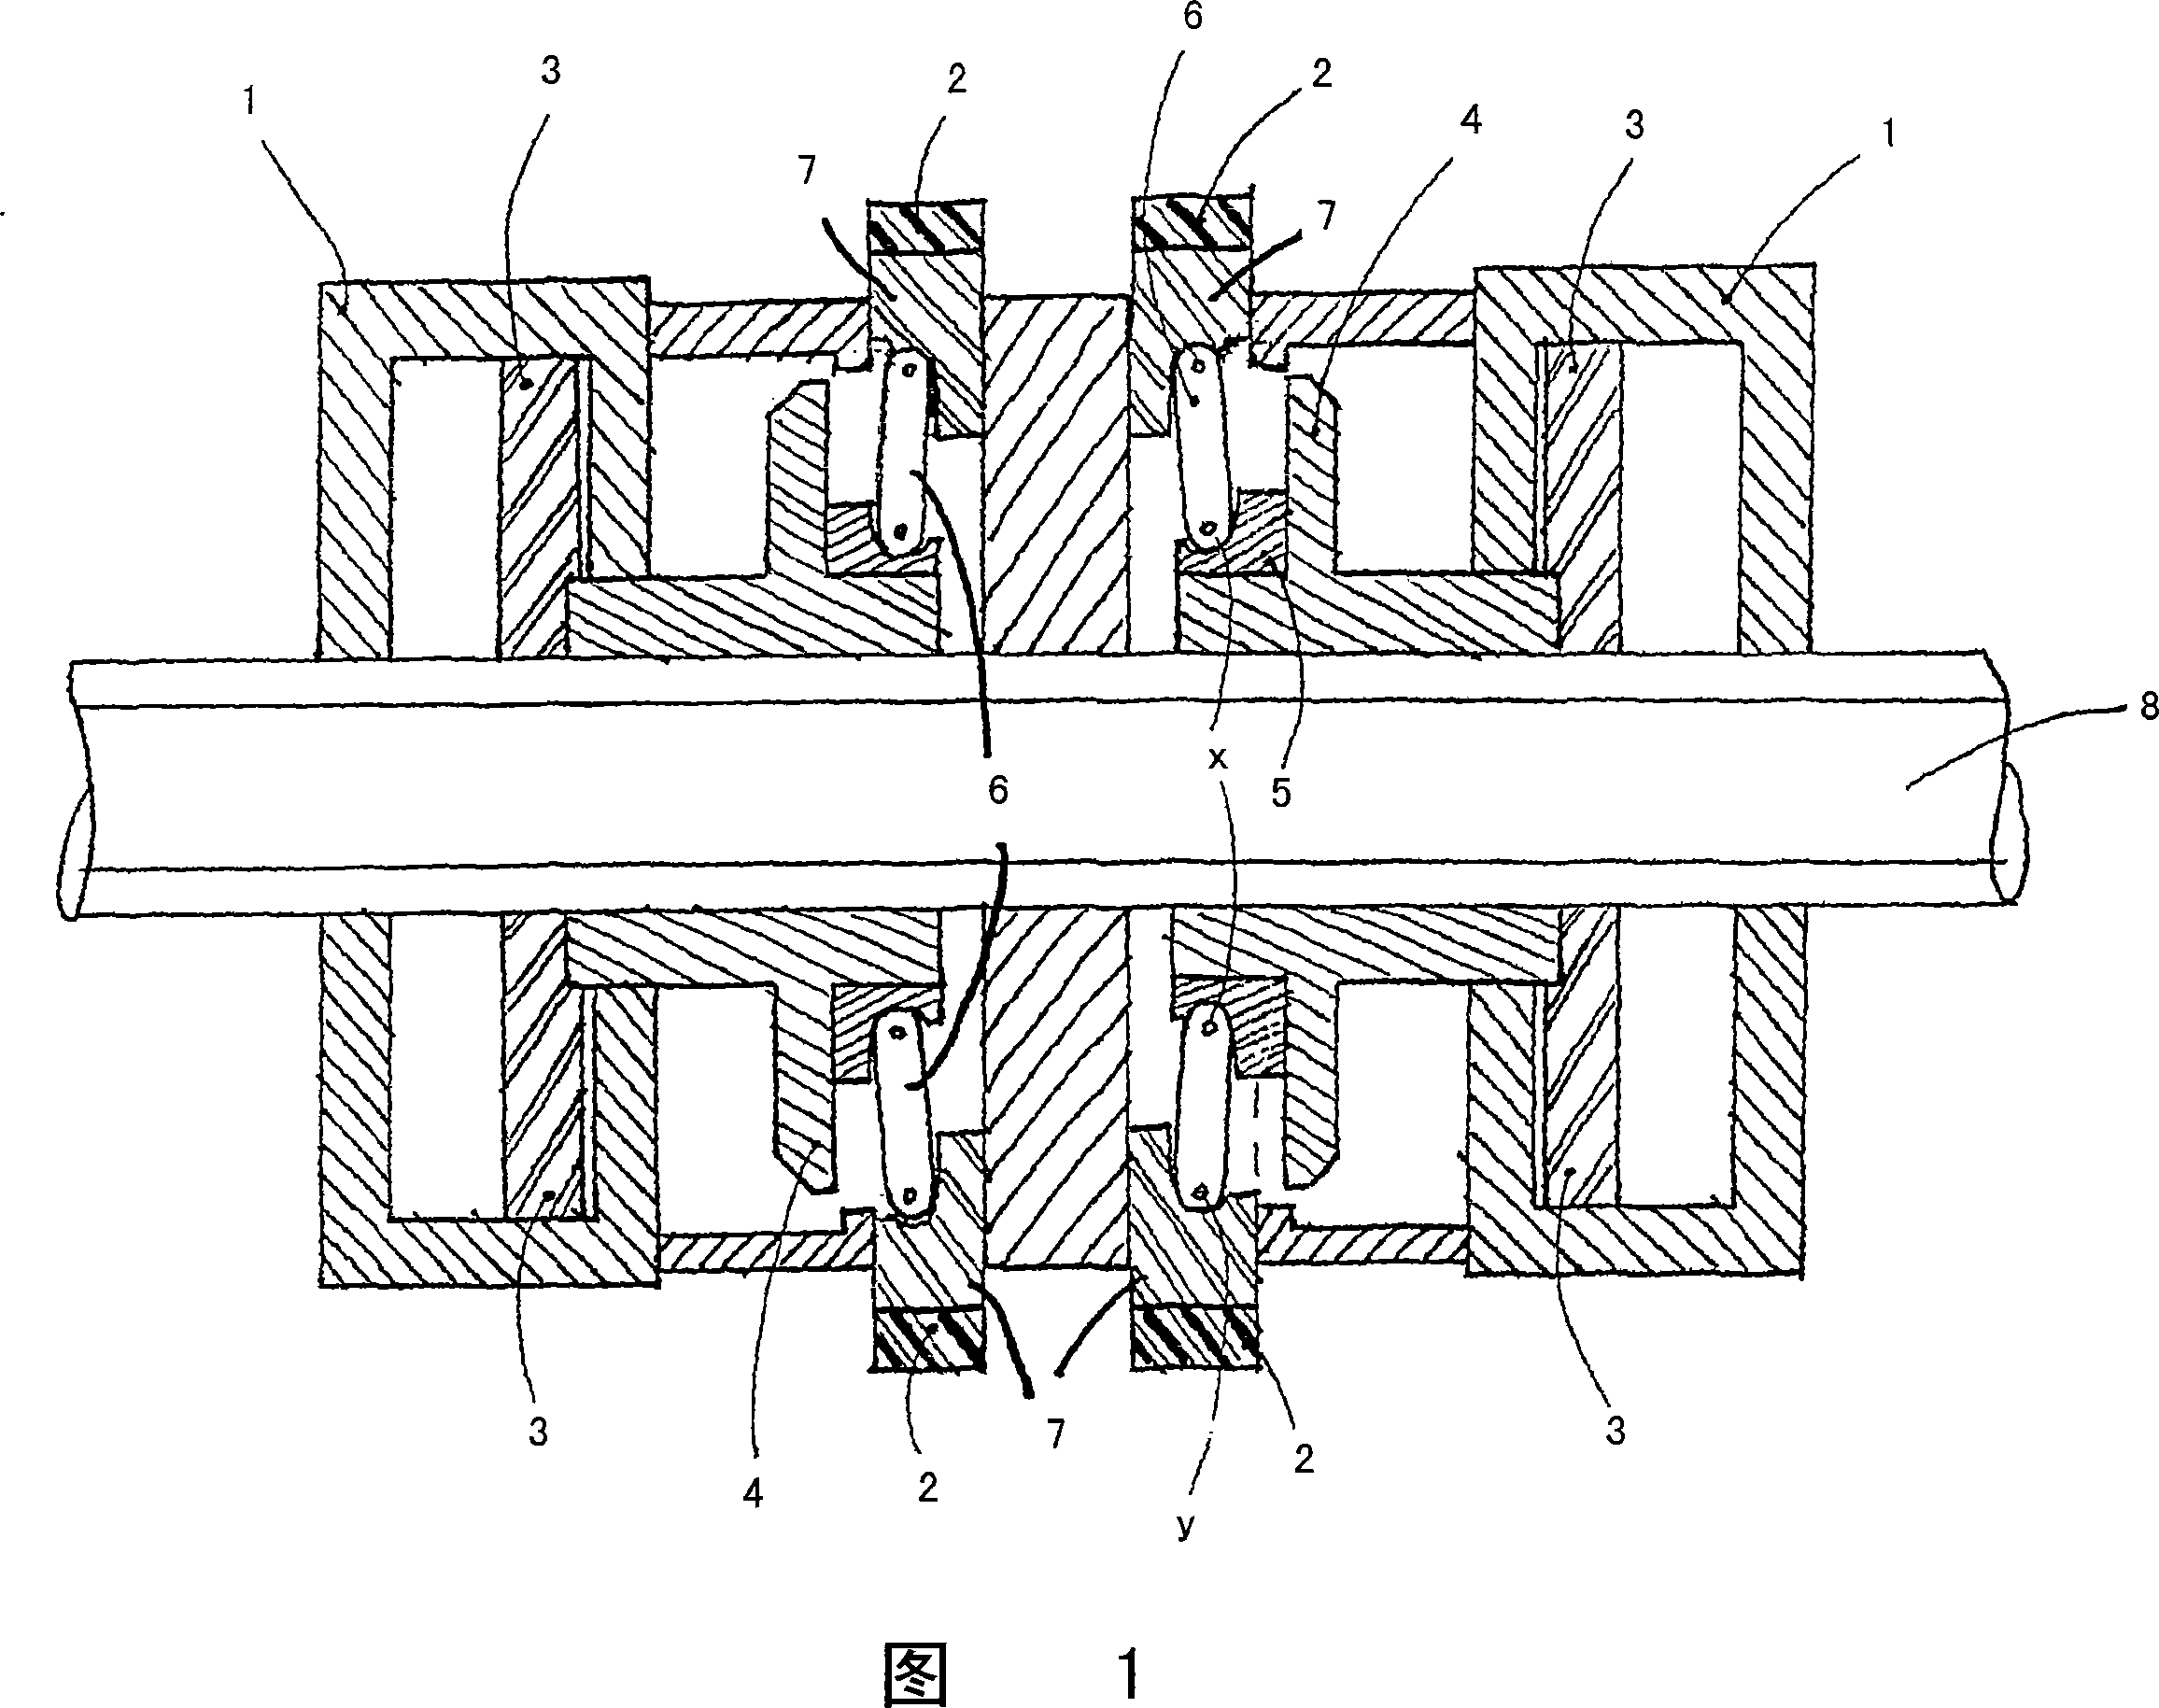 Device for centering and clamping tubular parts